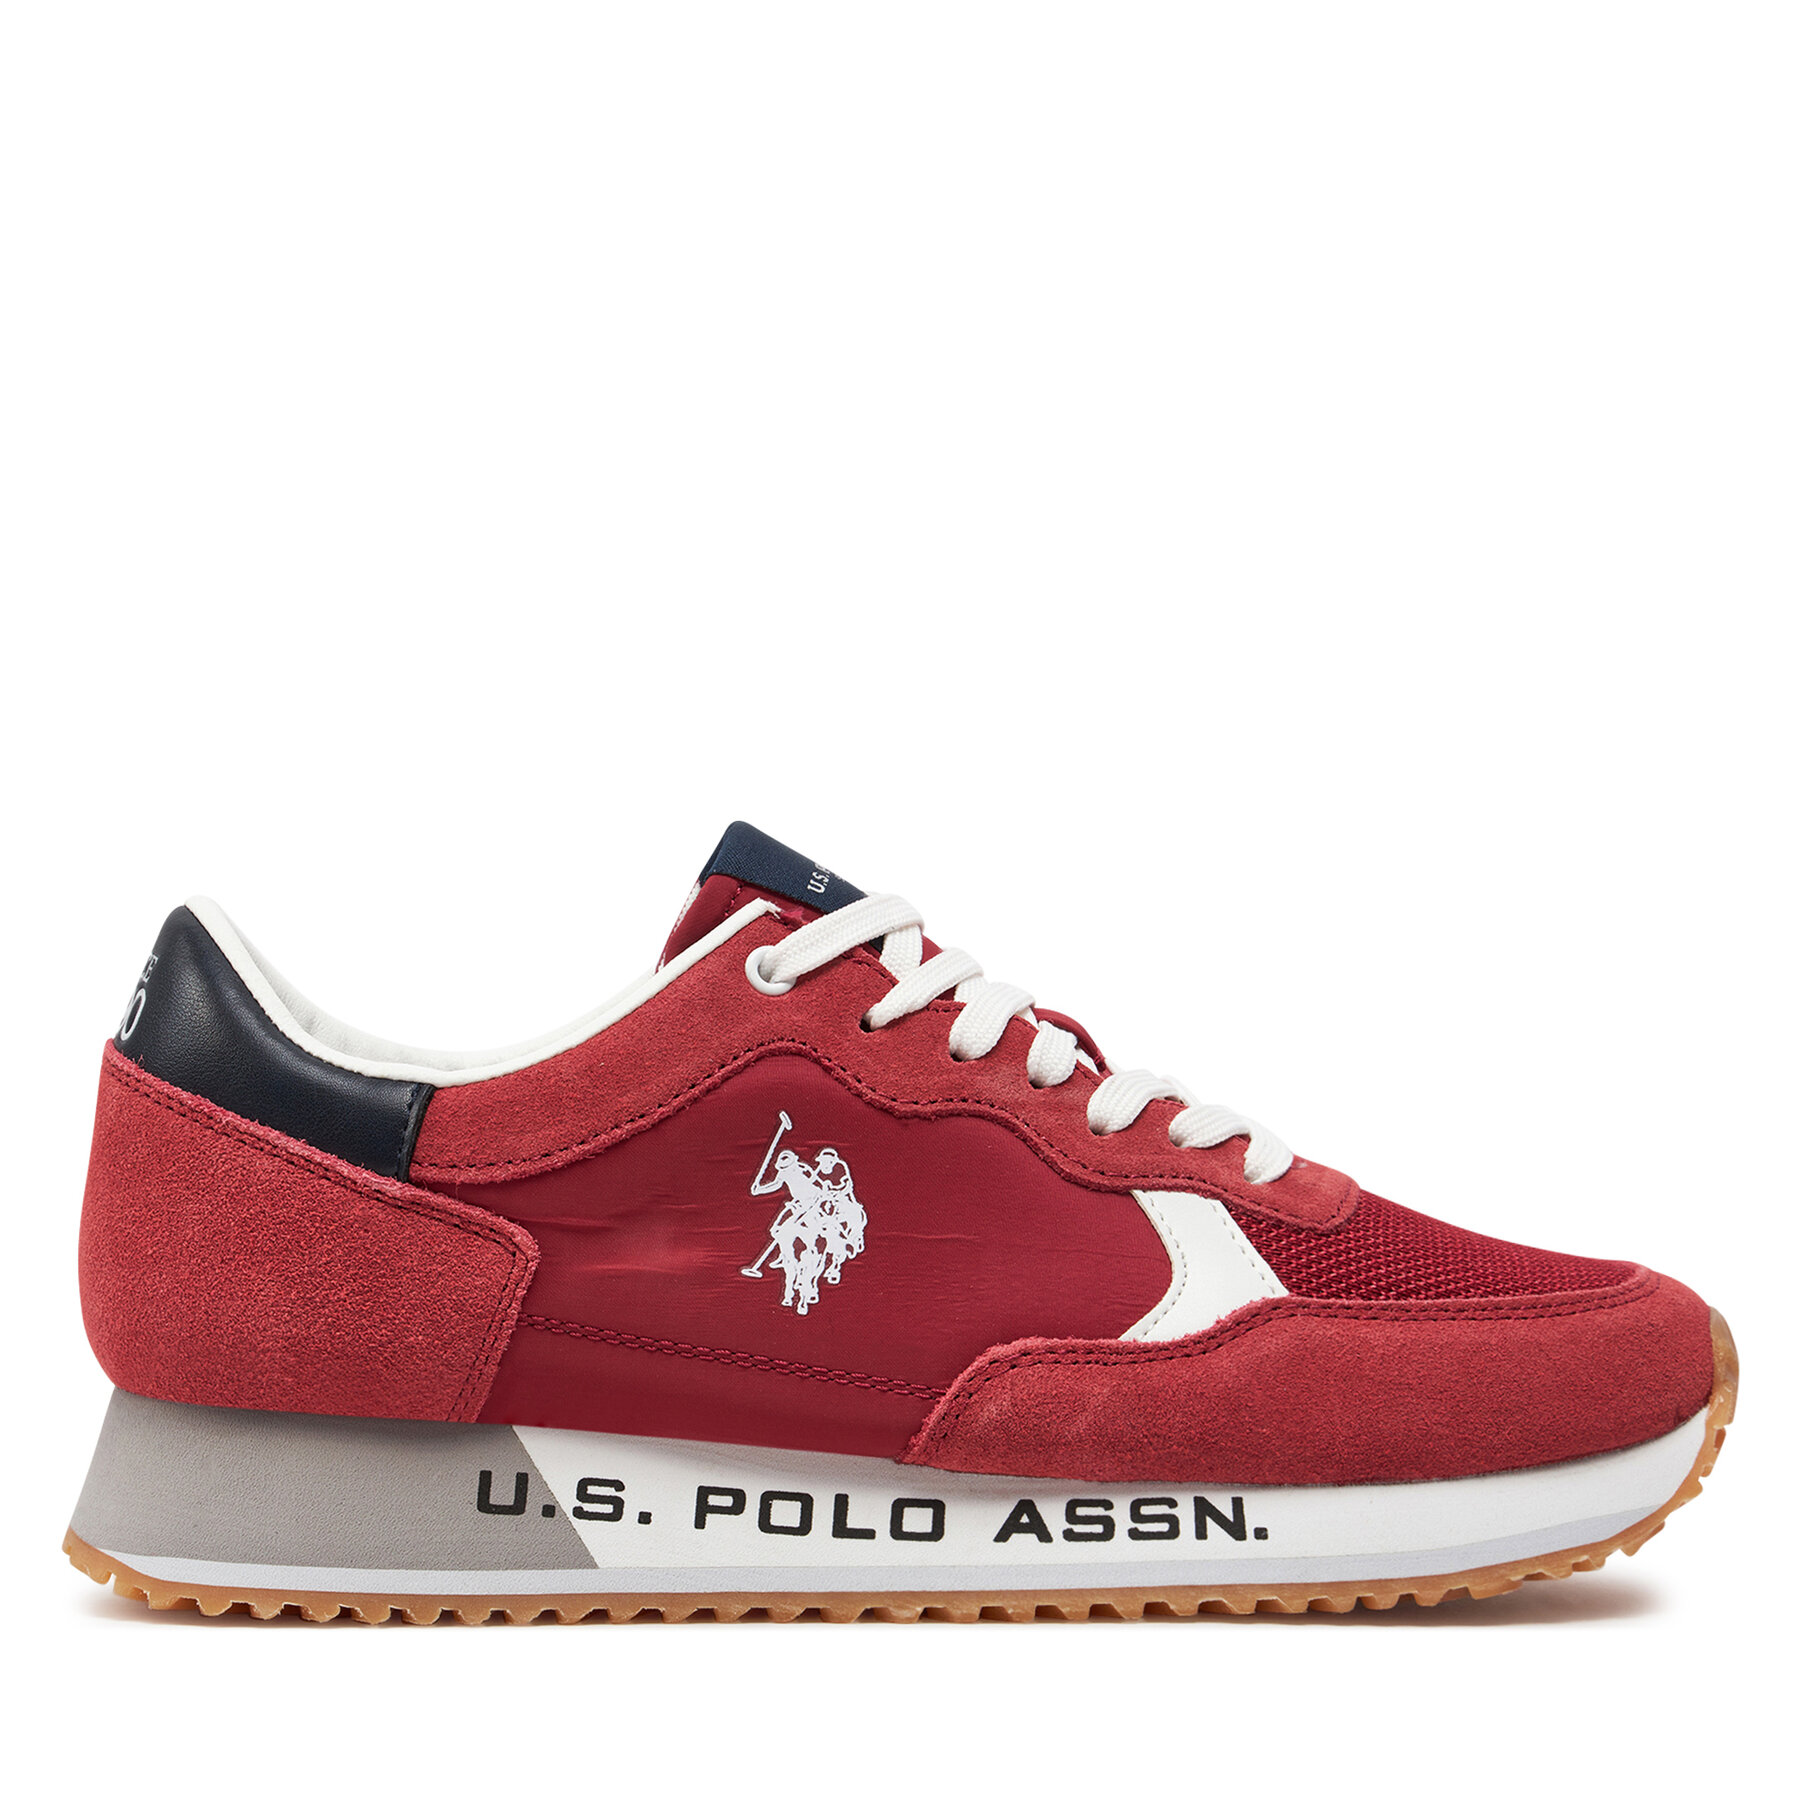 Sneakers U.S. Polo Assn. CleeF006 CLEEF006/4TS1 Red002 von U.S. Polo Assn.